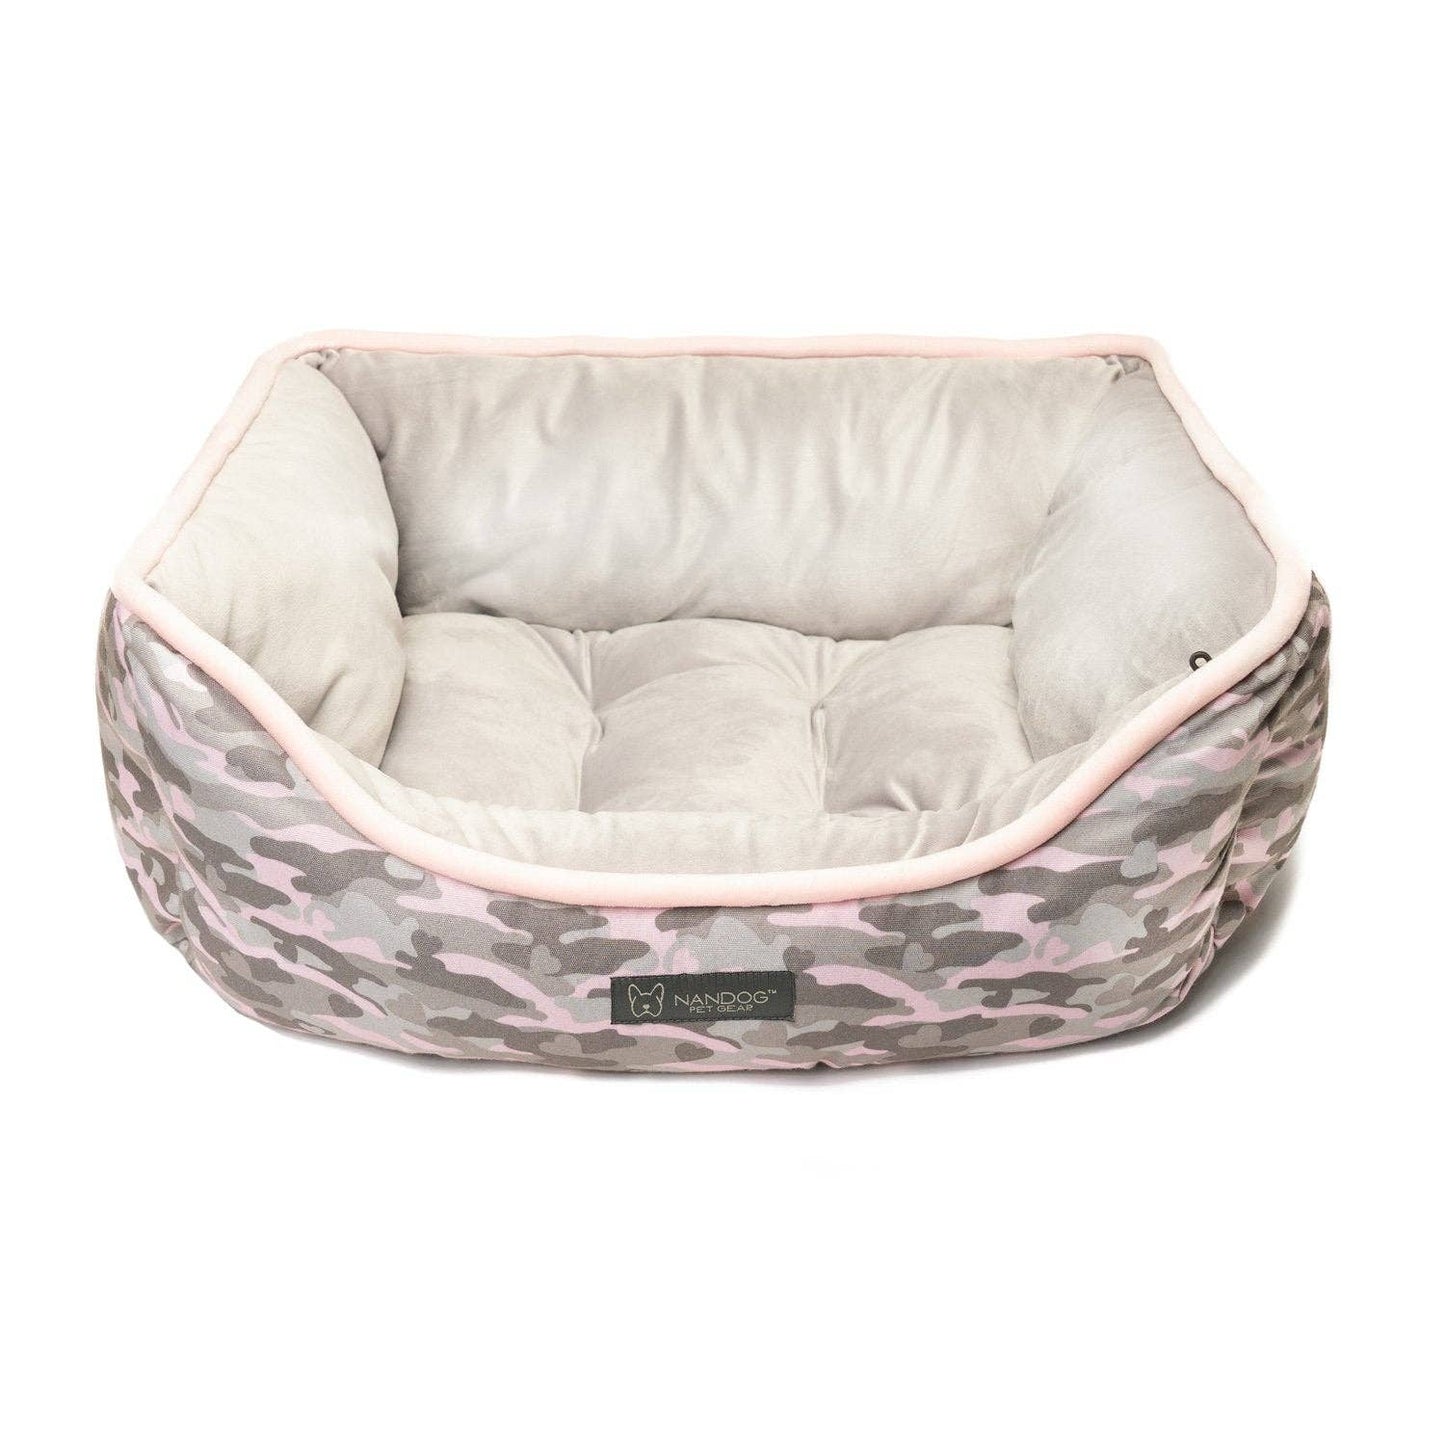 Load image into Gallery viewer, Nandog Pet Gear - REVERSIBLE PET BED CAMOUFLAGE - PINK  Image
